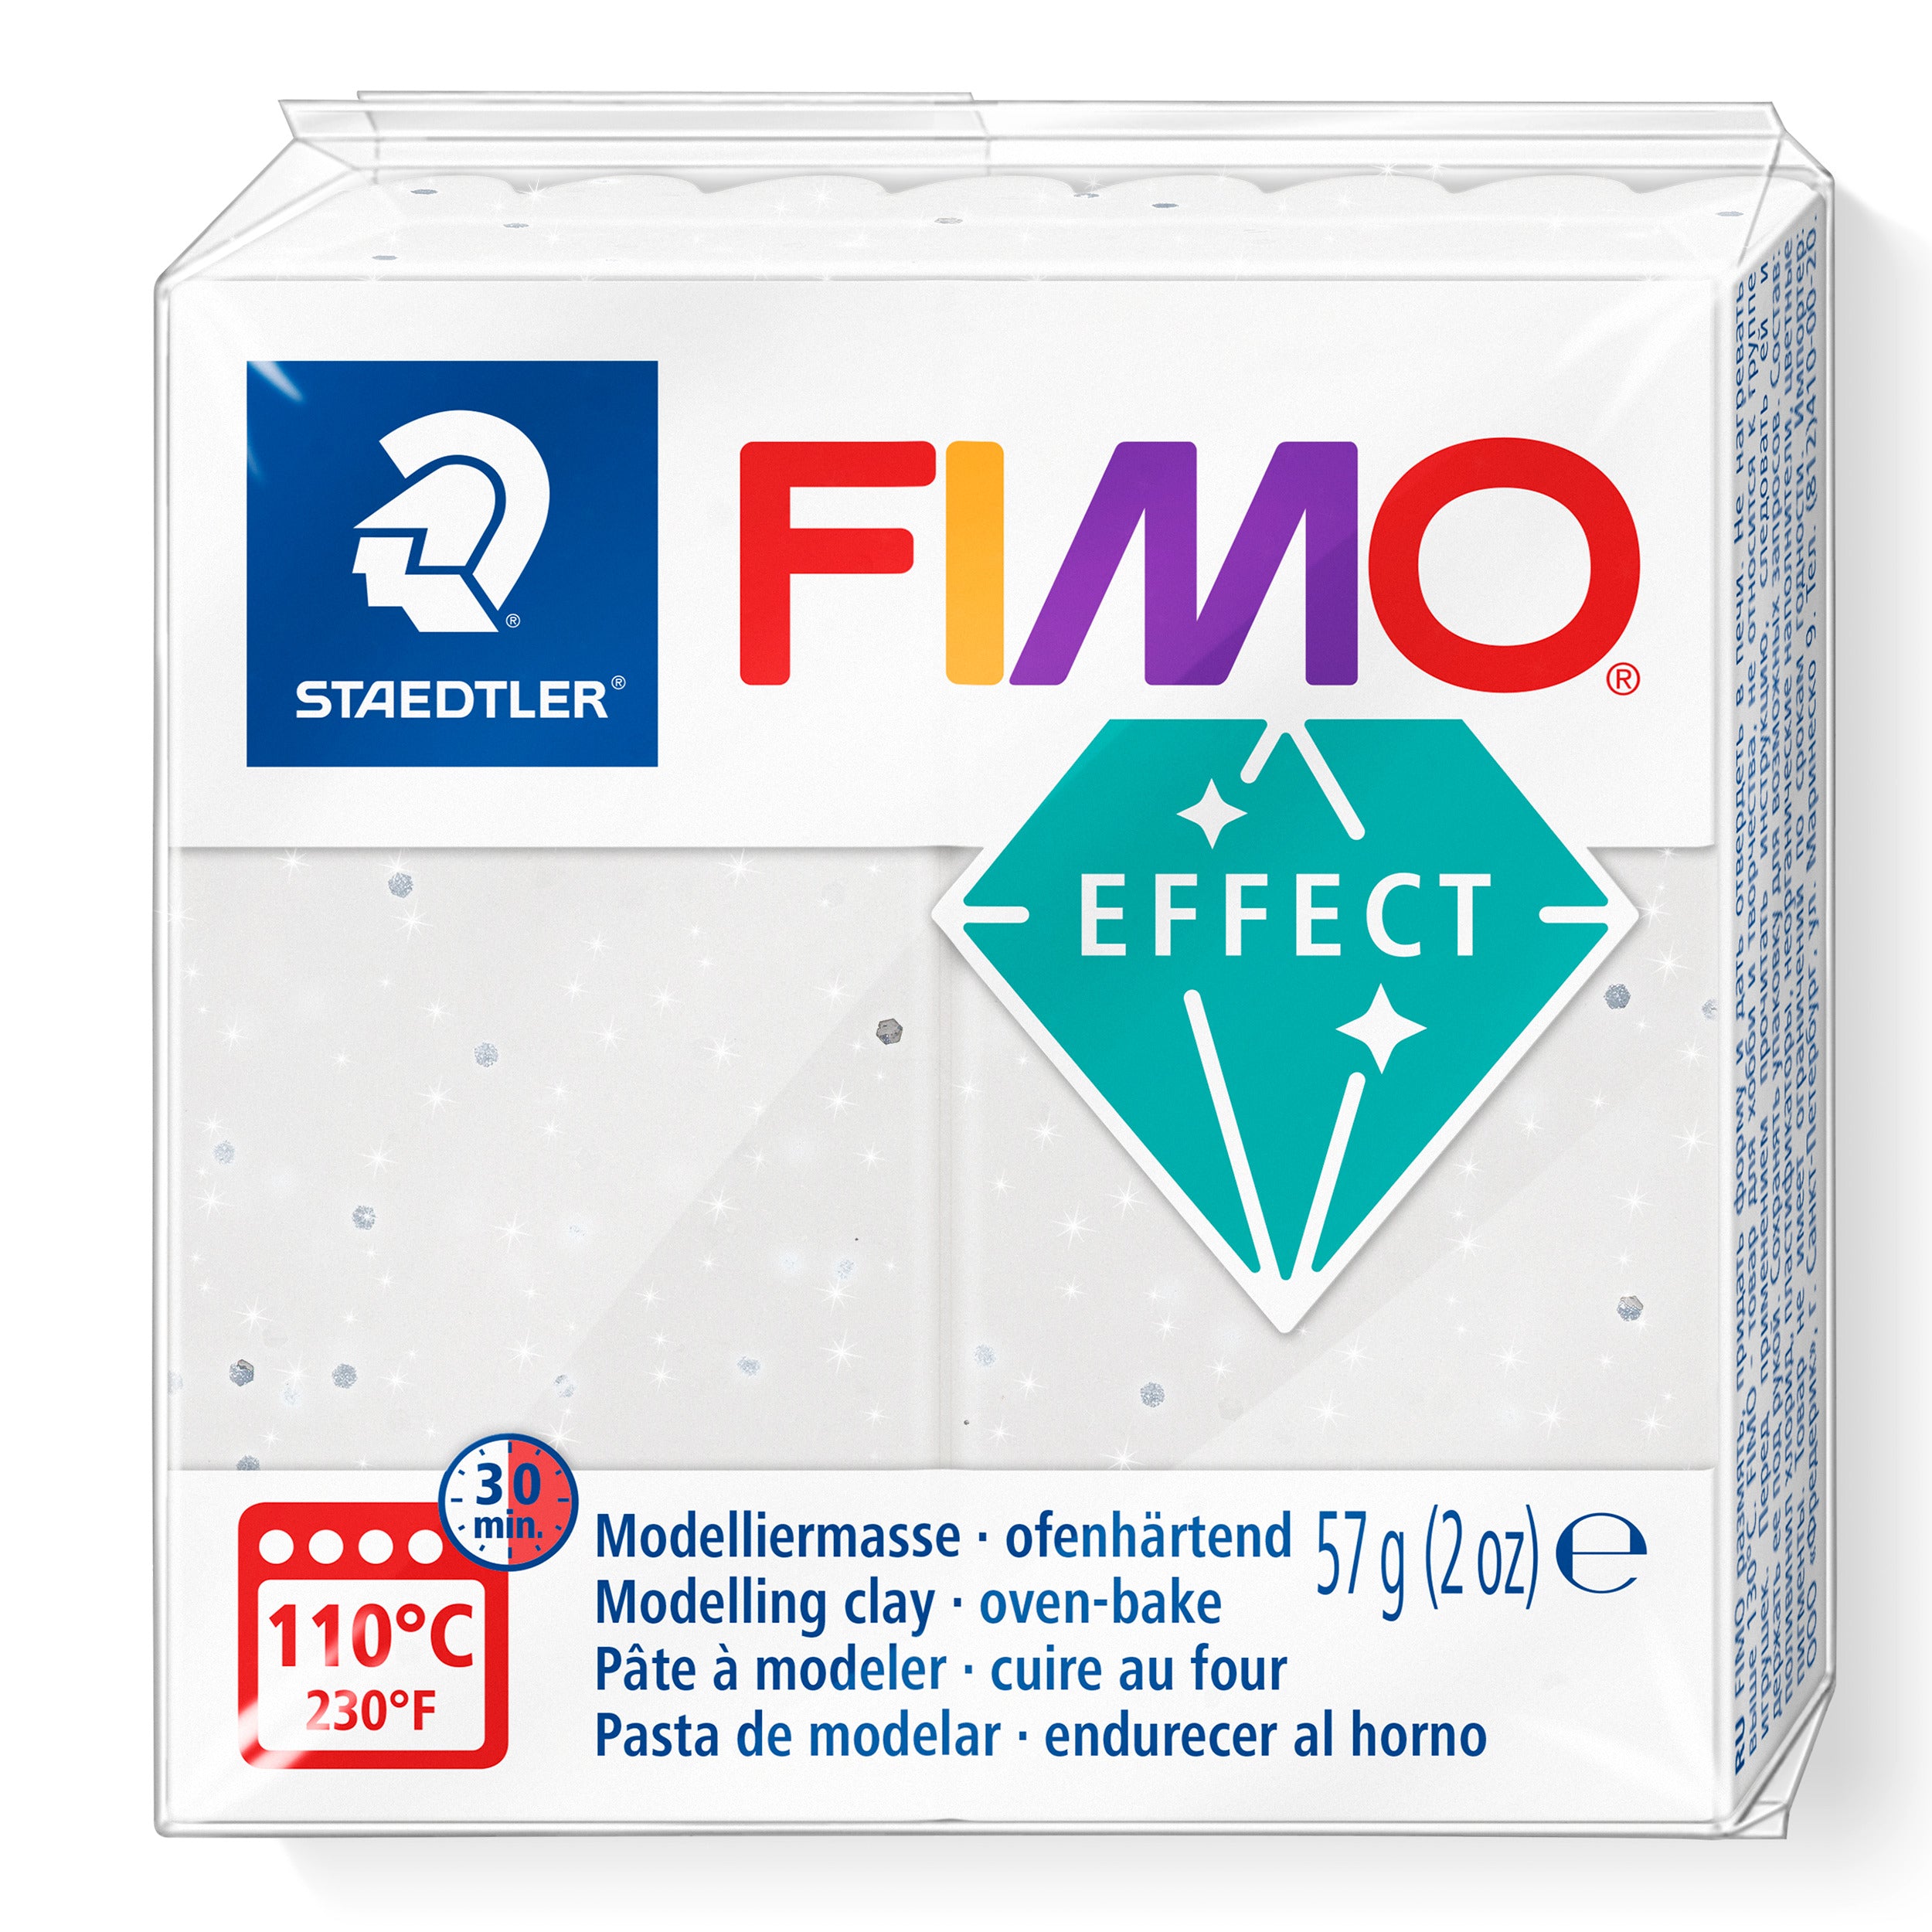 NEW Stone White Granite FIMO Effects Polymer Clay 57g 8010-003